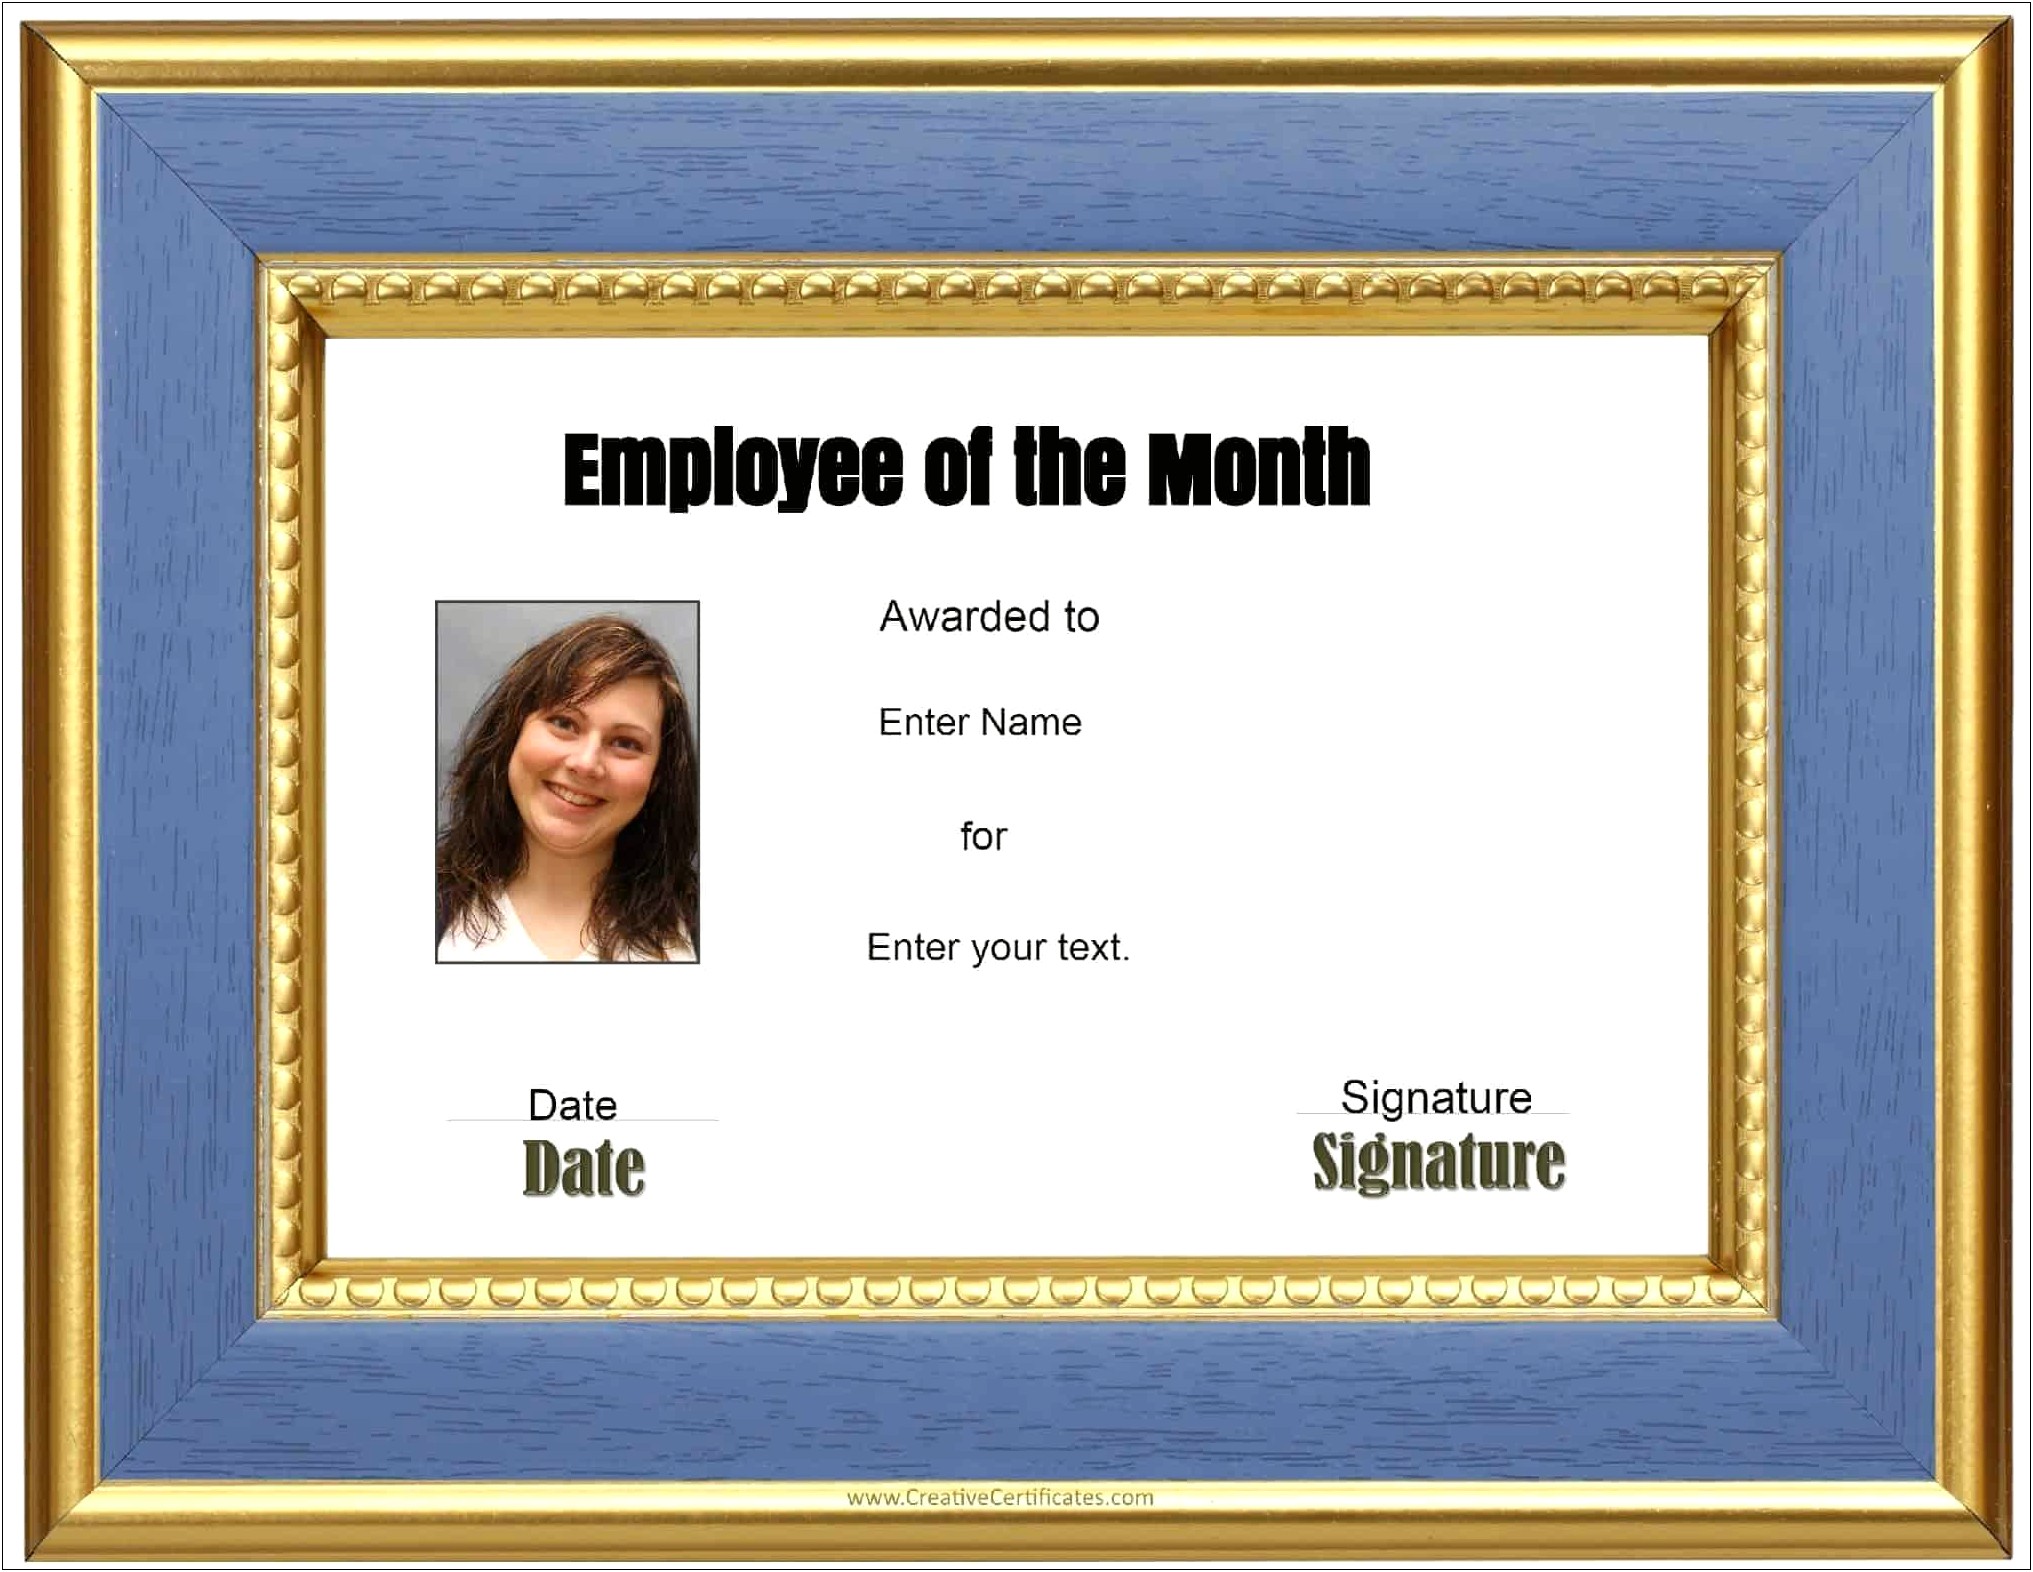 Employee Of The Quarter Certificate Template Free